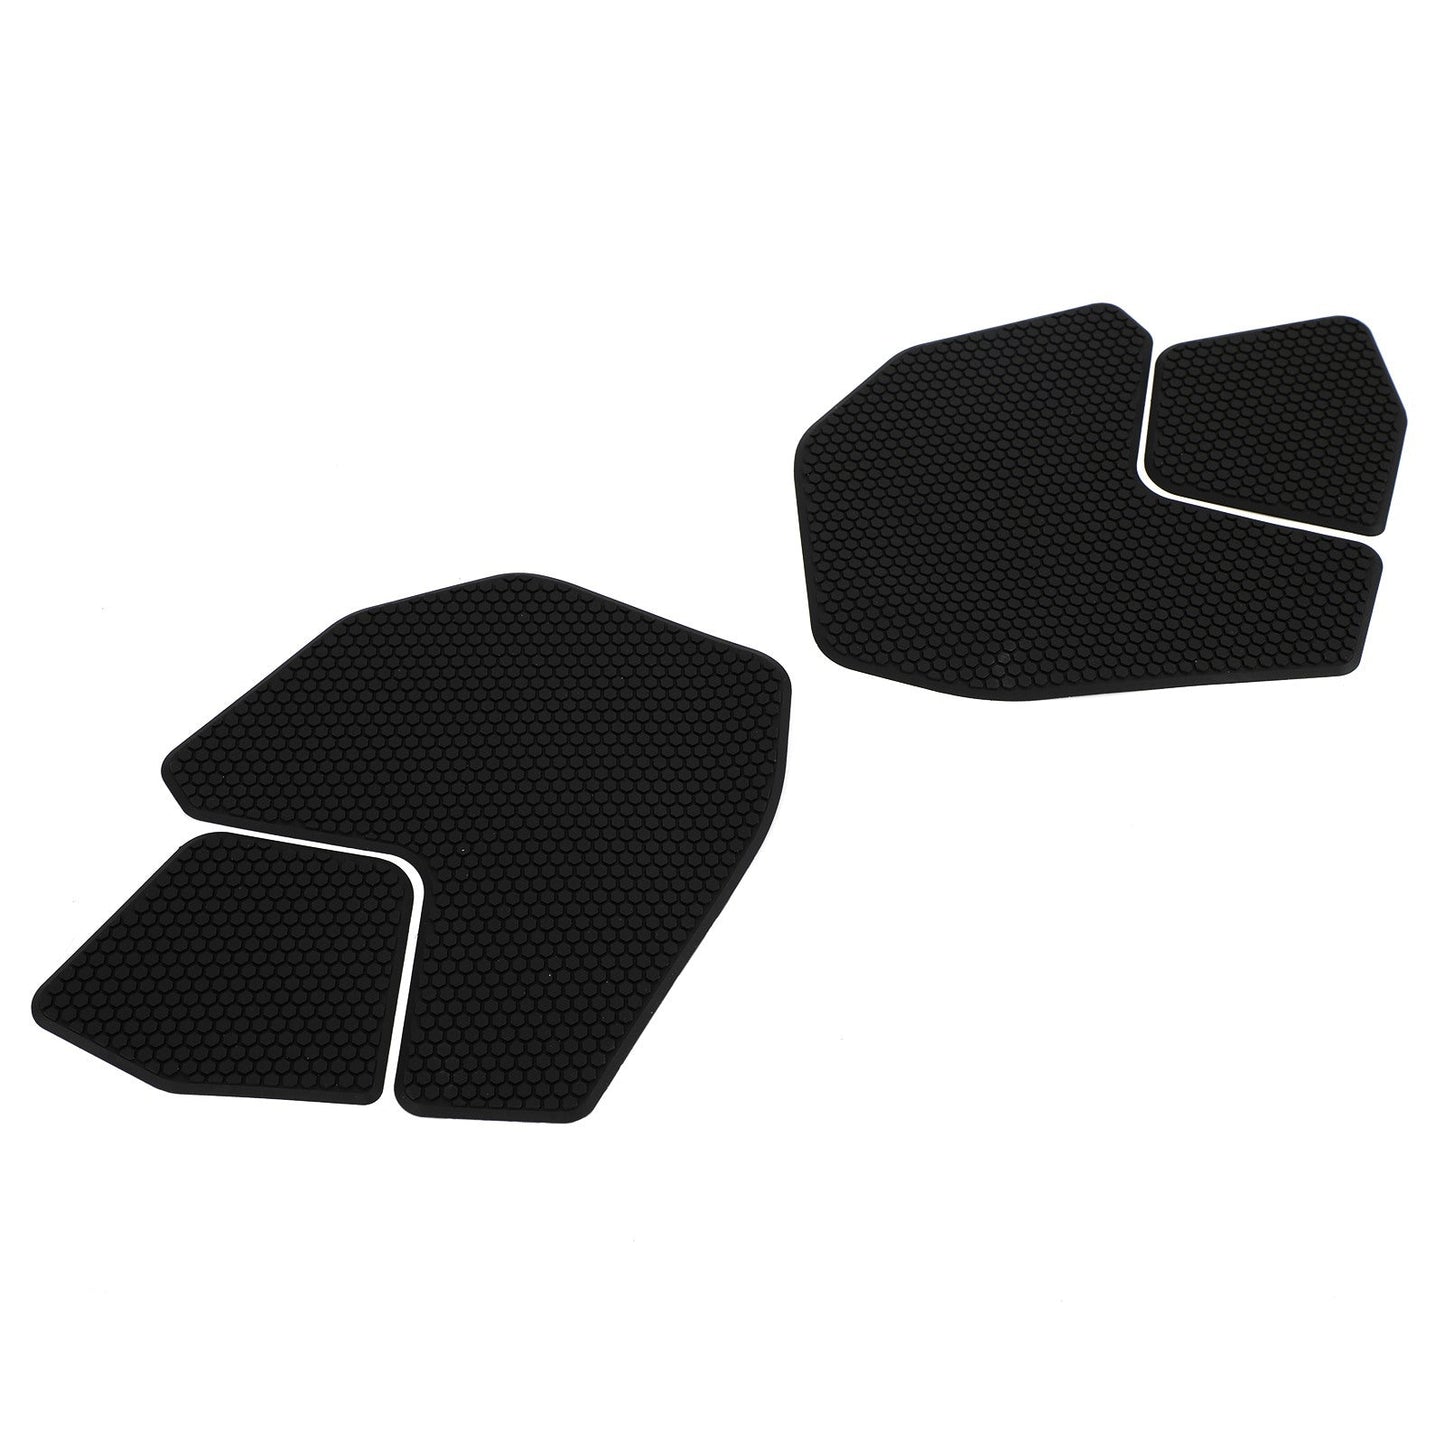 4x Side Tank Traction Grips Pads Fit for Yamaha MT-09 MT09 FZ09 2013-2019